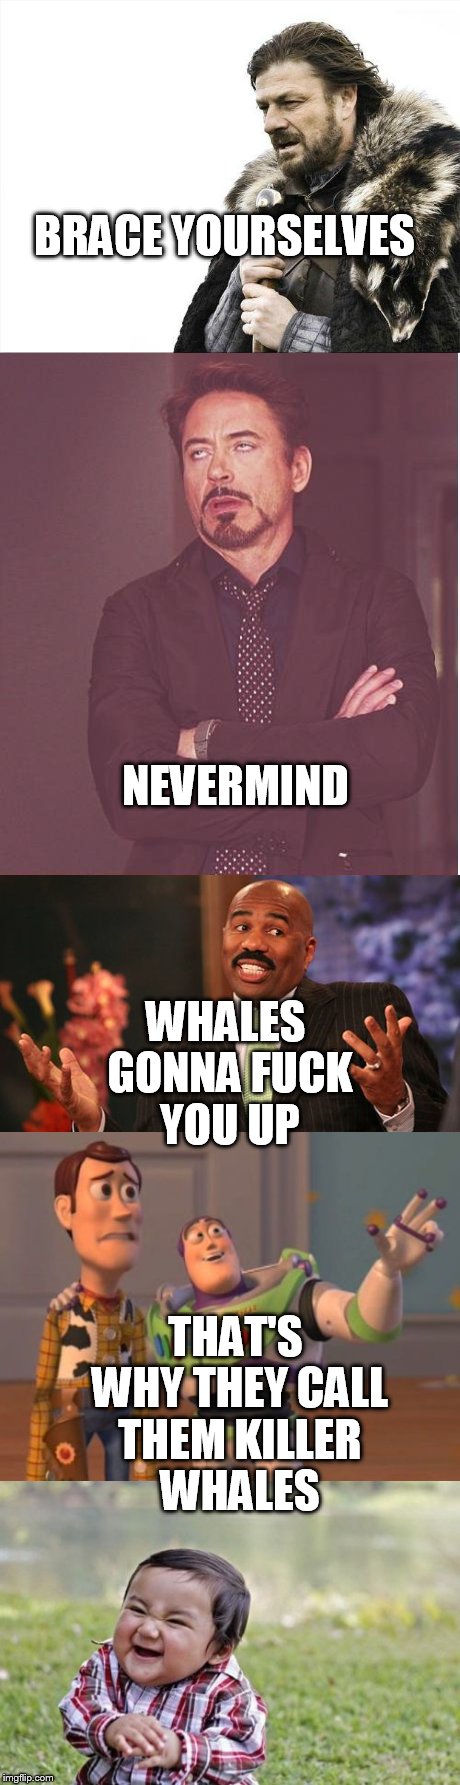 BRACE YOURSELVES THAT'S WHY THEY CALL THEM KILLER WHALES NEVERMIND WHALES GONNA F**K YOU UP | made w/ Imgflip meme maker